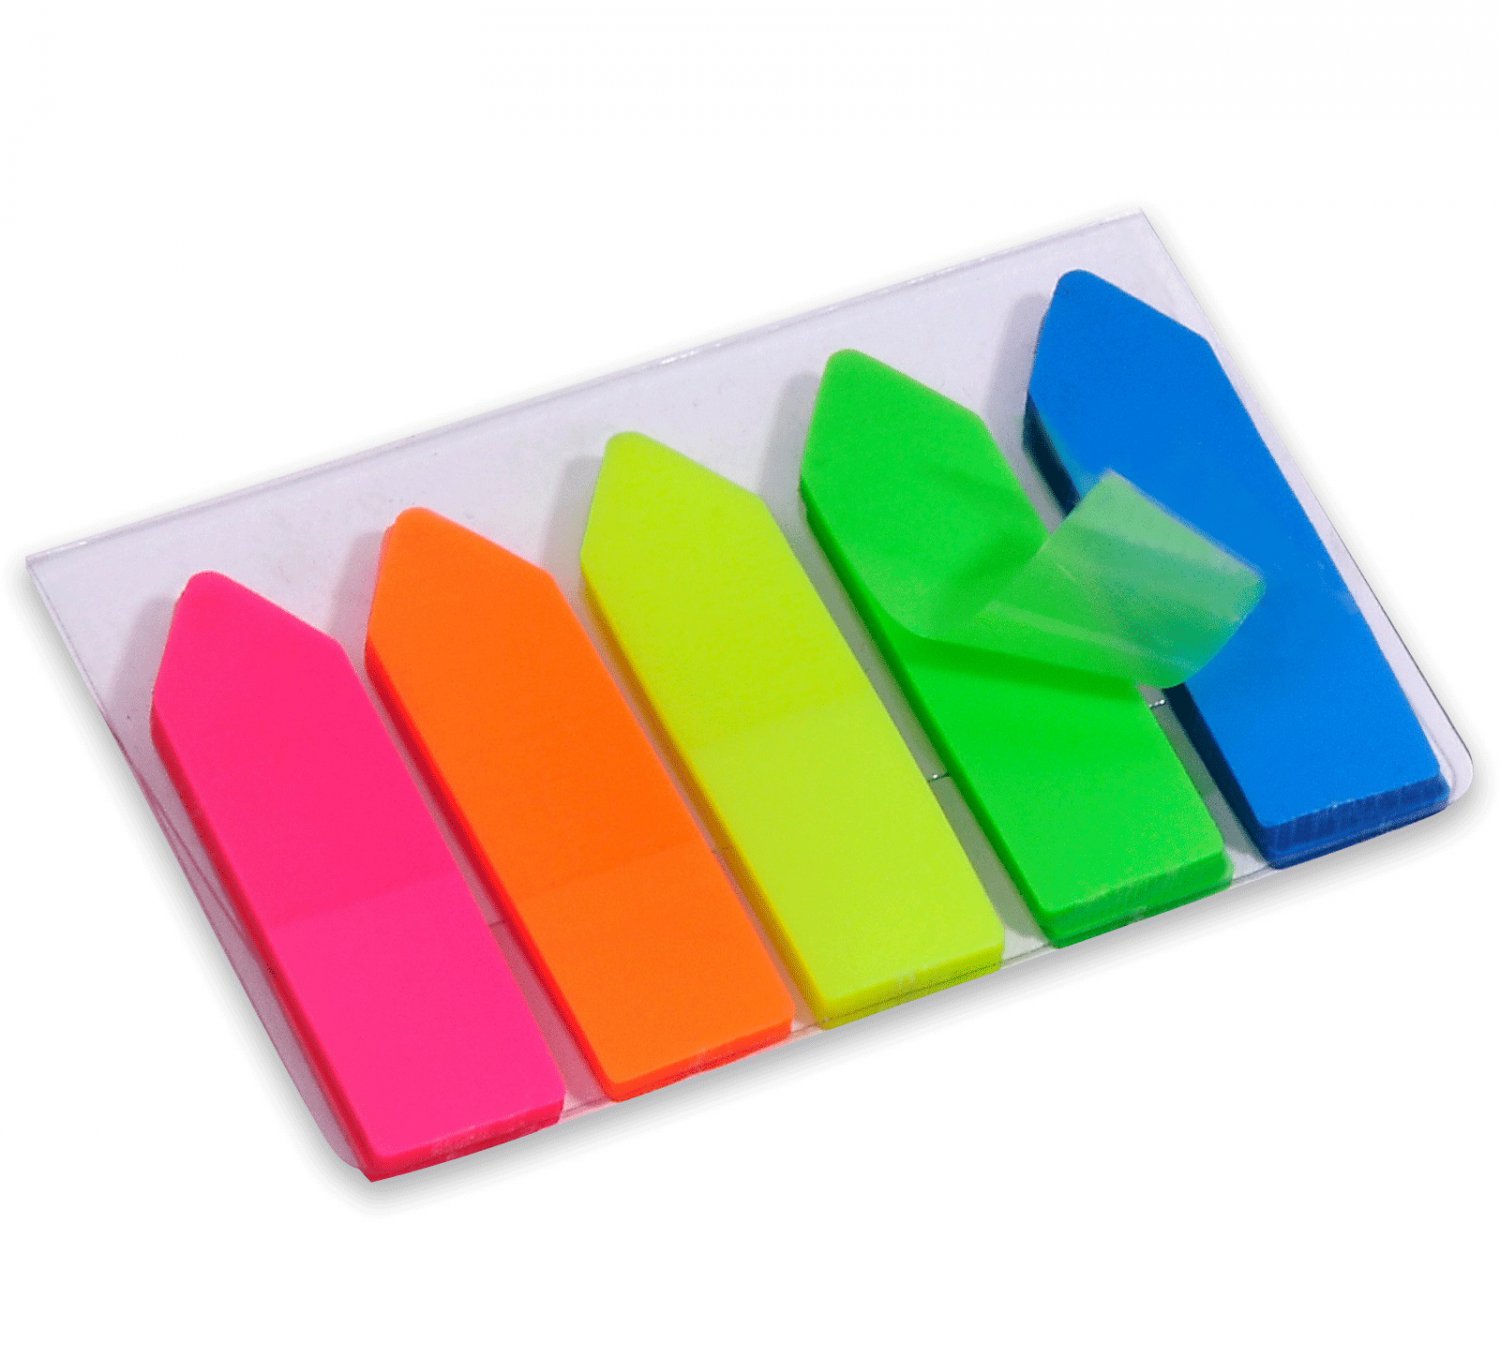 Set of 5 Plastic Adhesive Bookmarks, ARROWS, 50 sheets per color